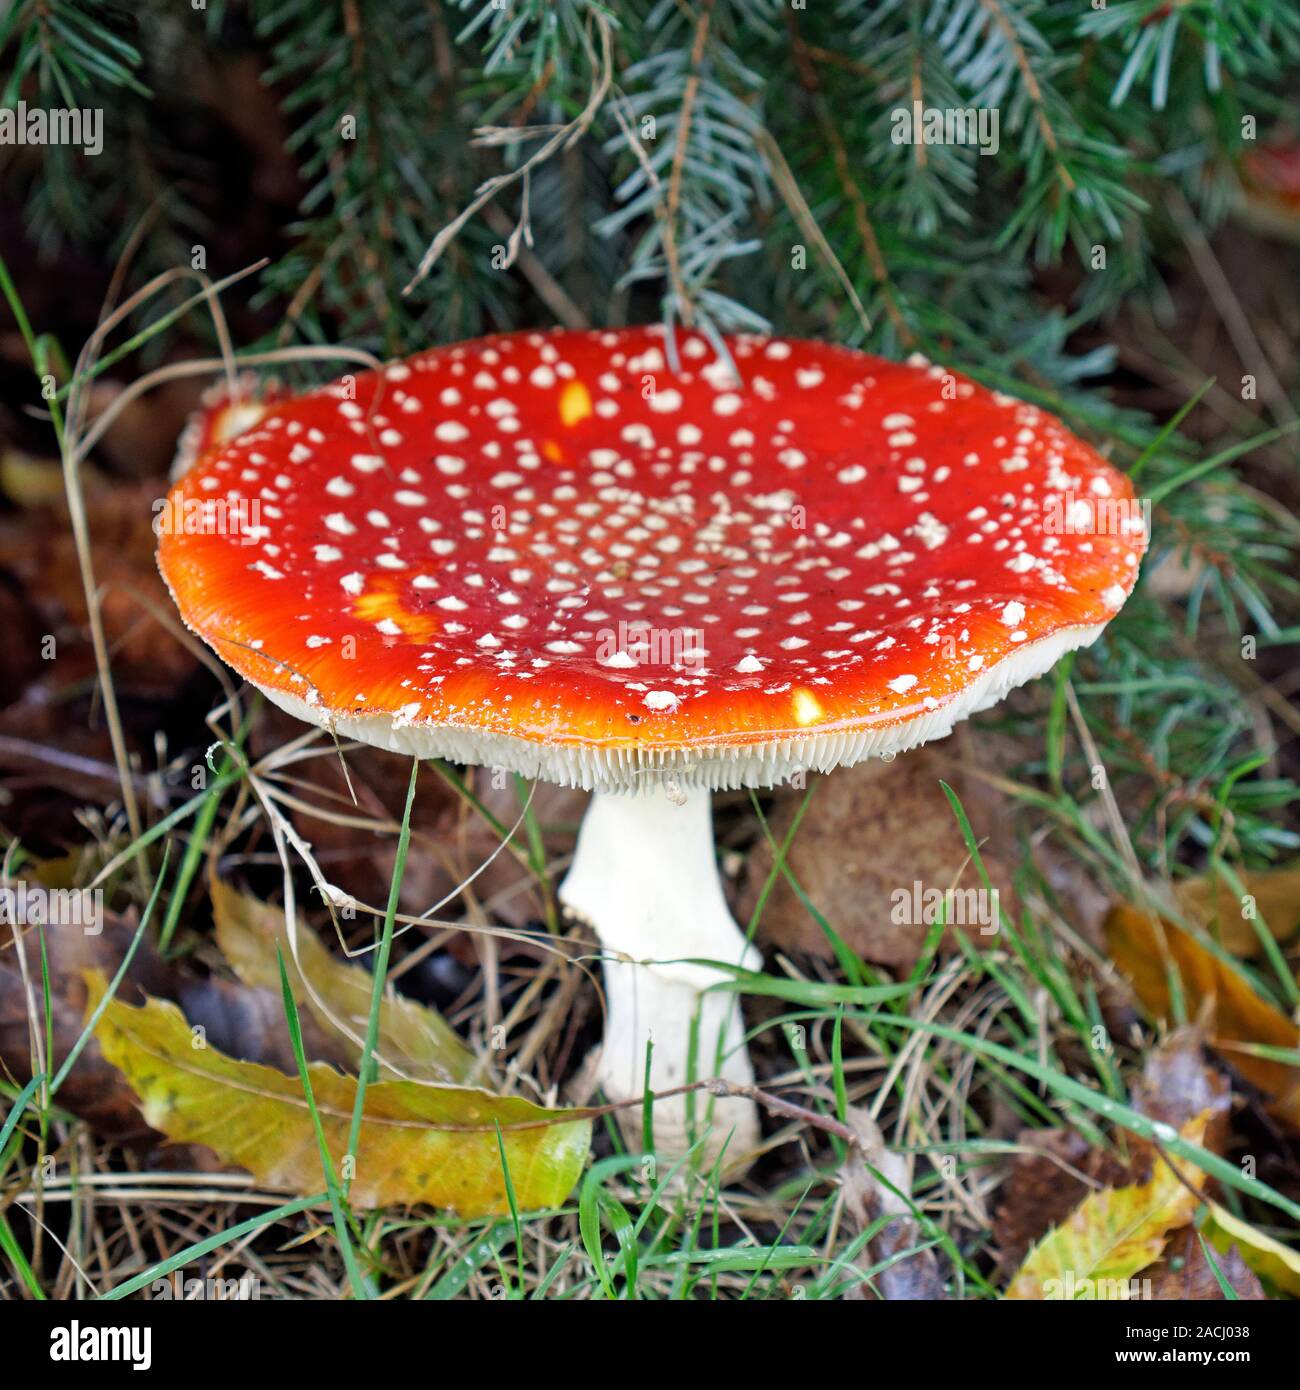 Closeup of a mature Amanita muscaria or Fly Amanita mushroom growing on the ground, Vancouver, British Columbia, Canada Stock Photo